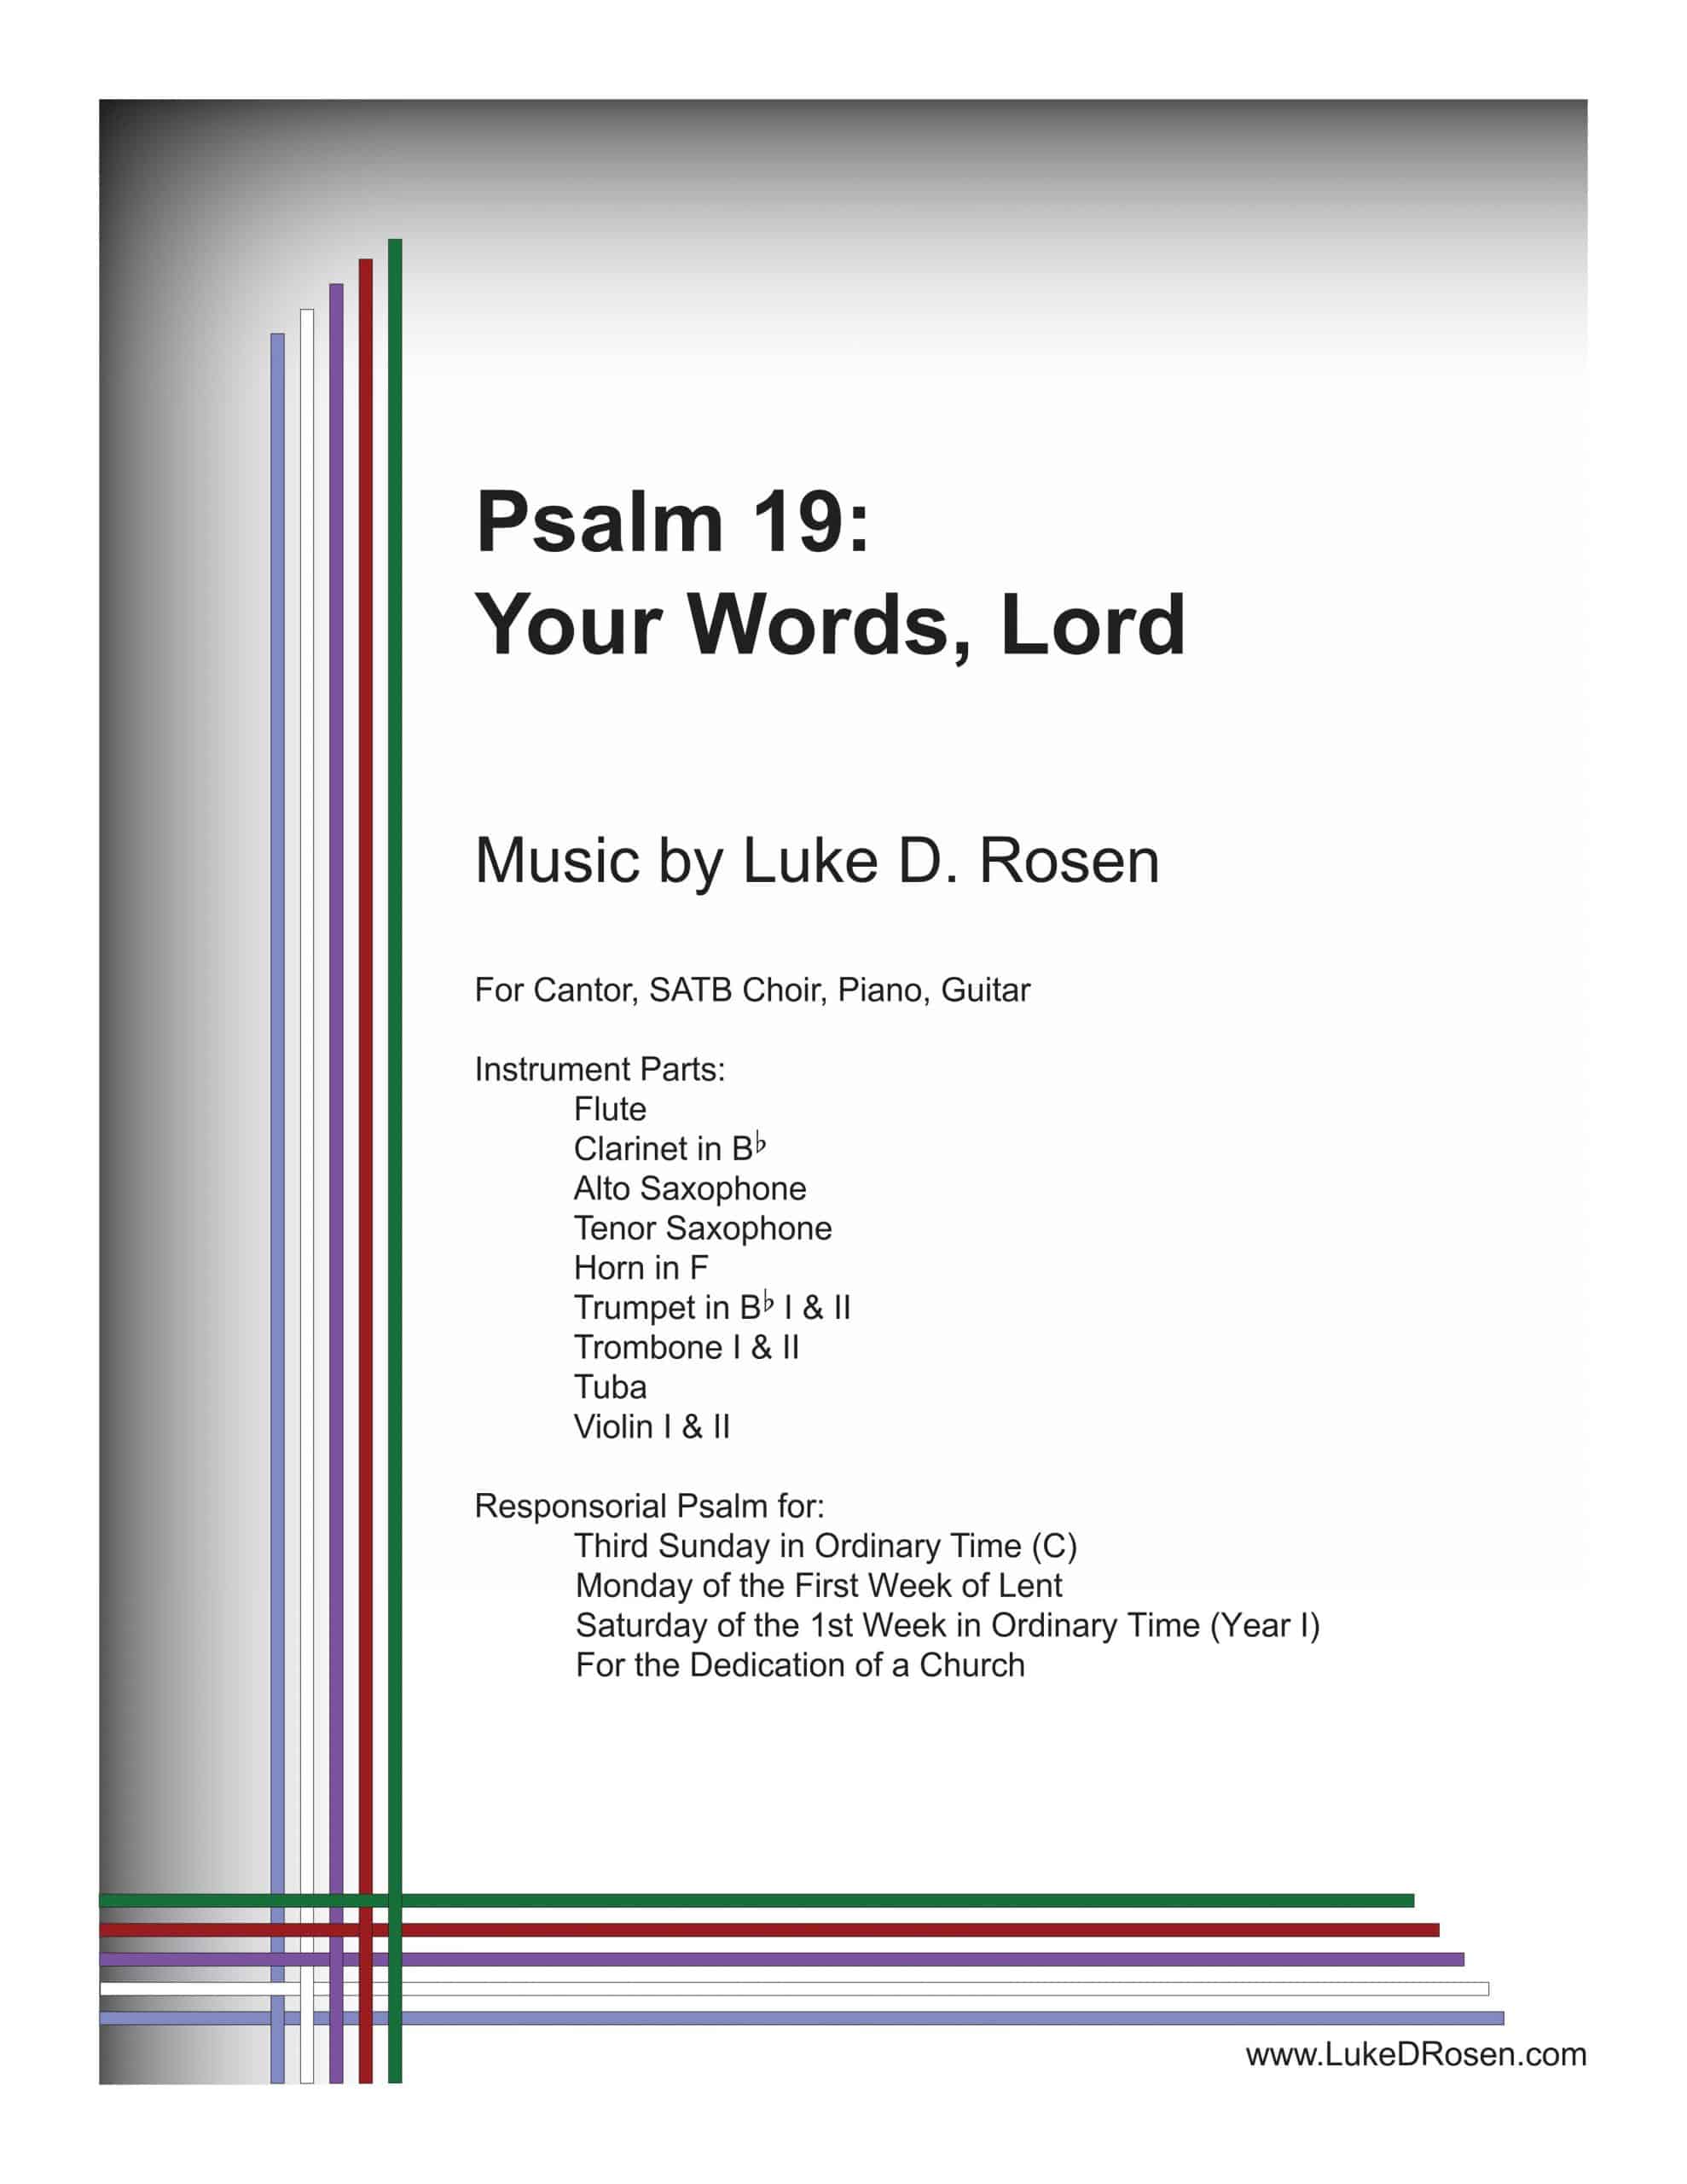 Psalm 19 – Your Words Lord (Rosen)